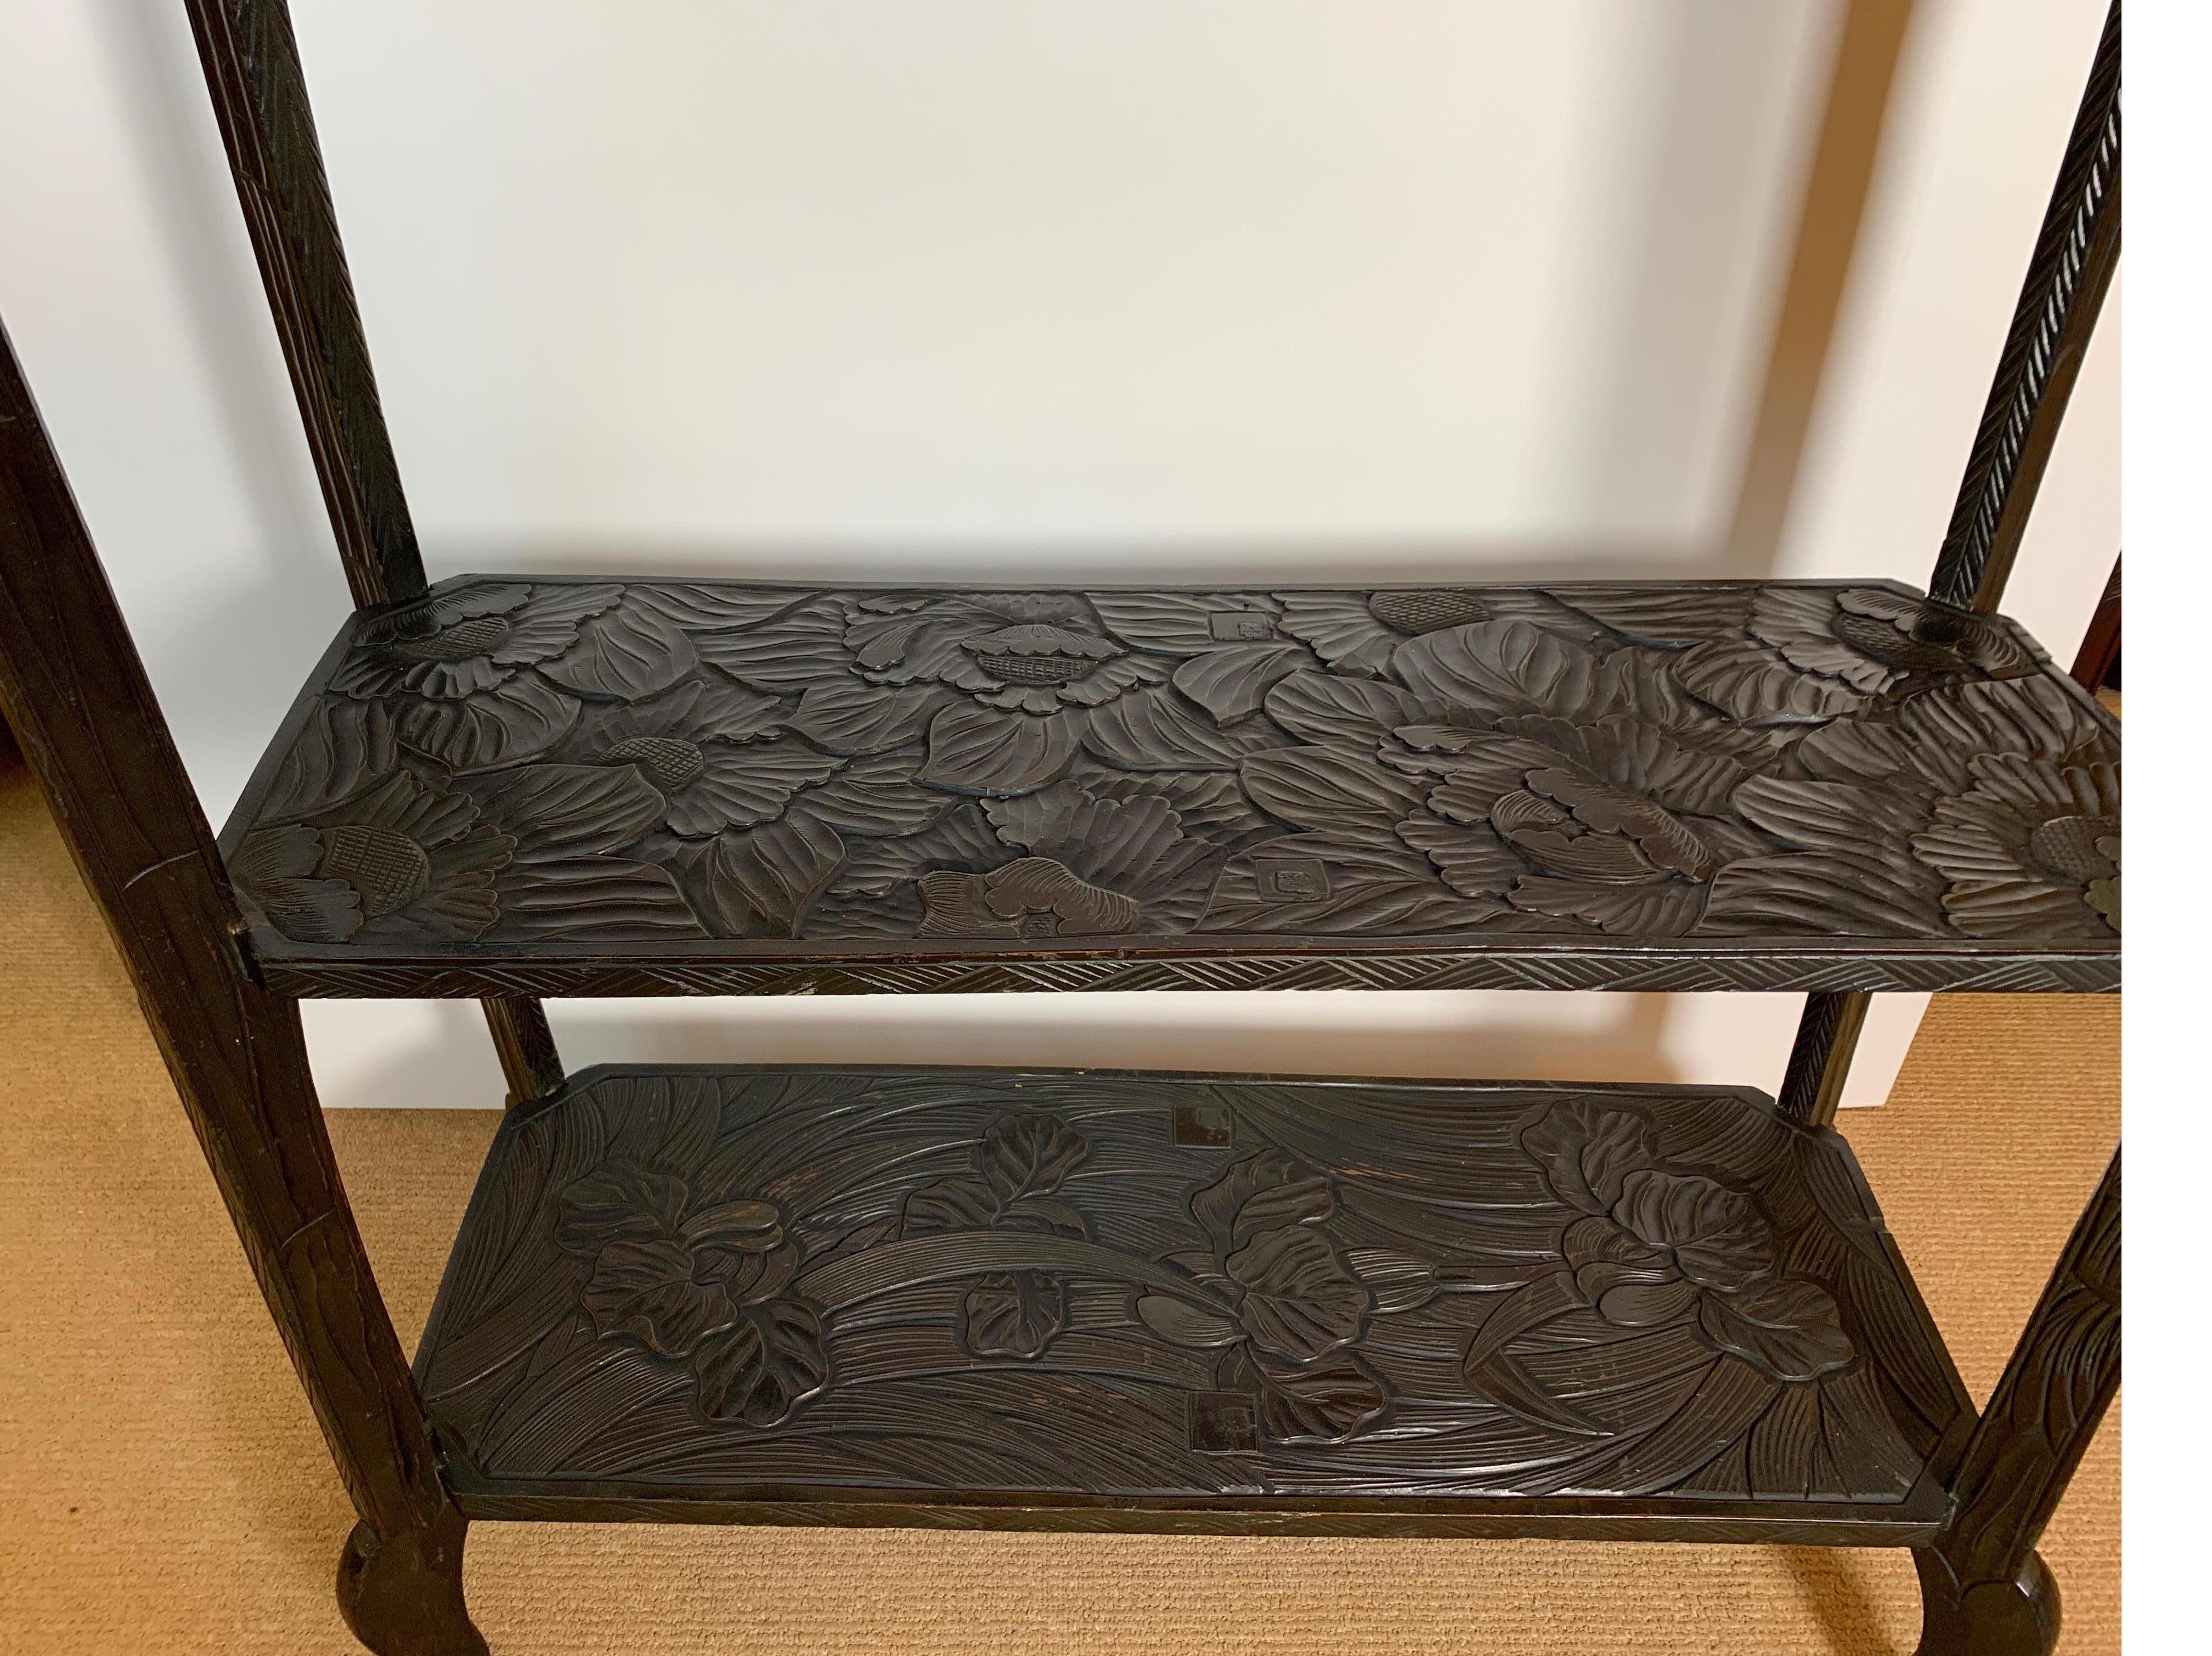 Art Nouveau Japanese Three-Tiered Shelf Hand Carved in a Botanical Motif